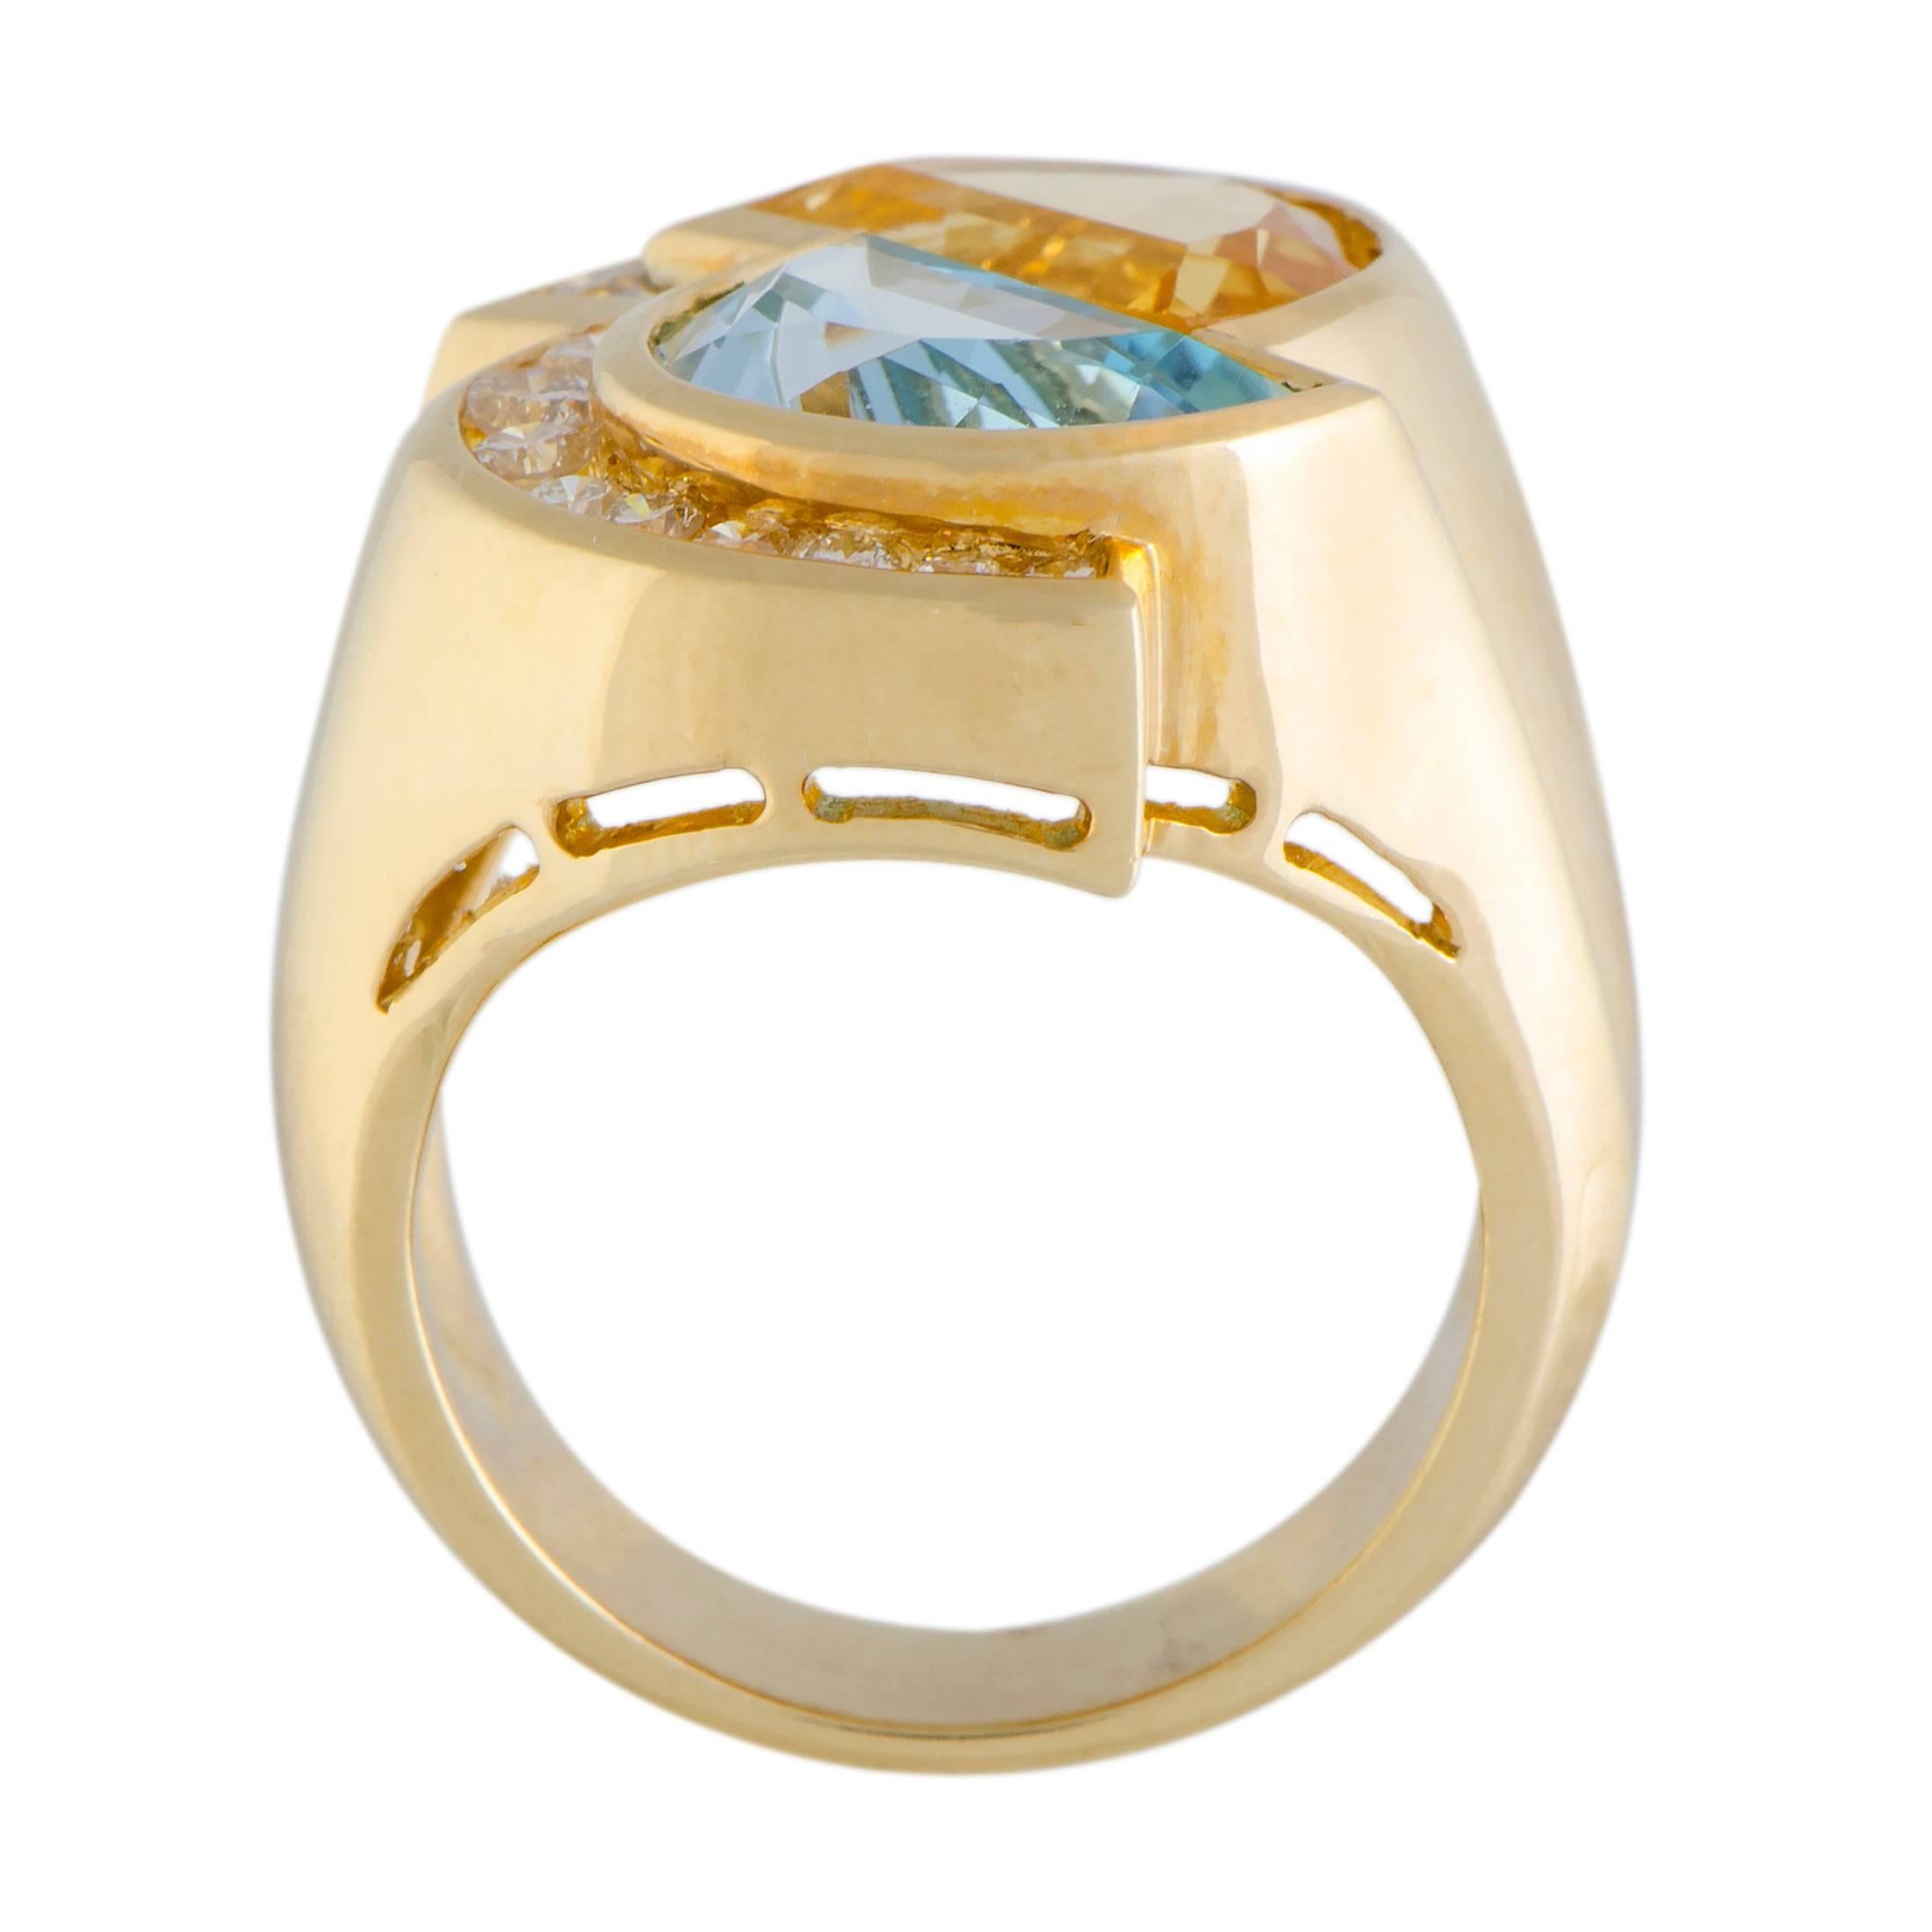 The strikingly offbeat combination of warm-toned citrine and cool-toned topaz gives a stunningly fashionable appeal to this spectacular ring. The ring is made of 18K yellow gold and also boasts 0.65 carats of glistening diamond stones.
Ring Top